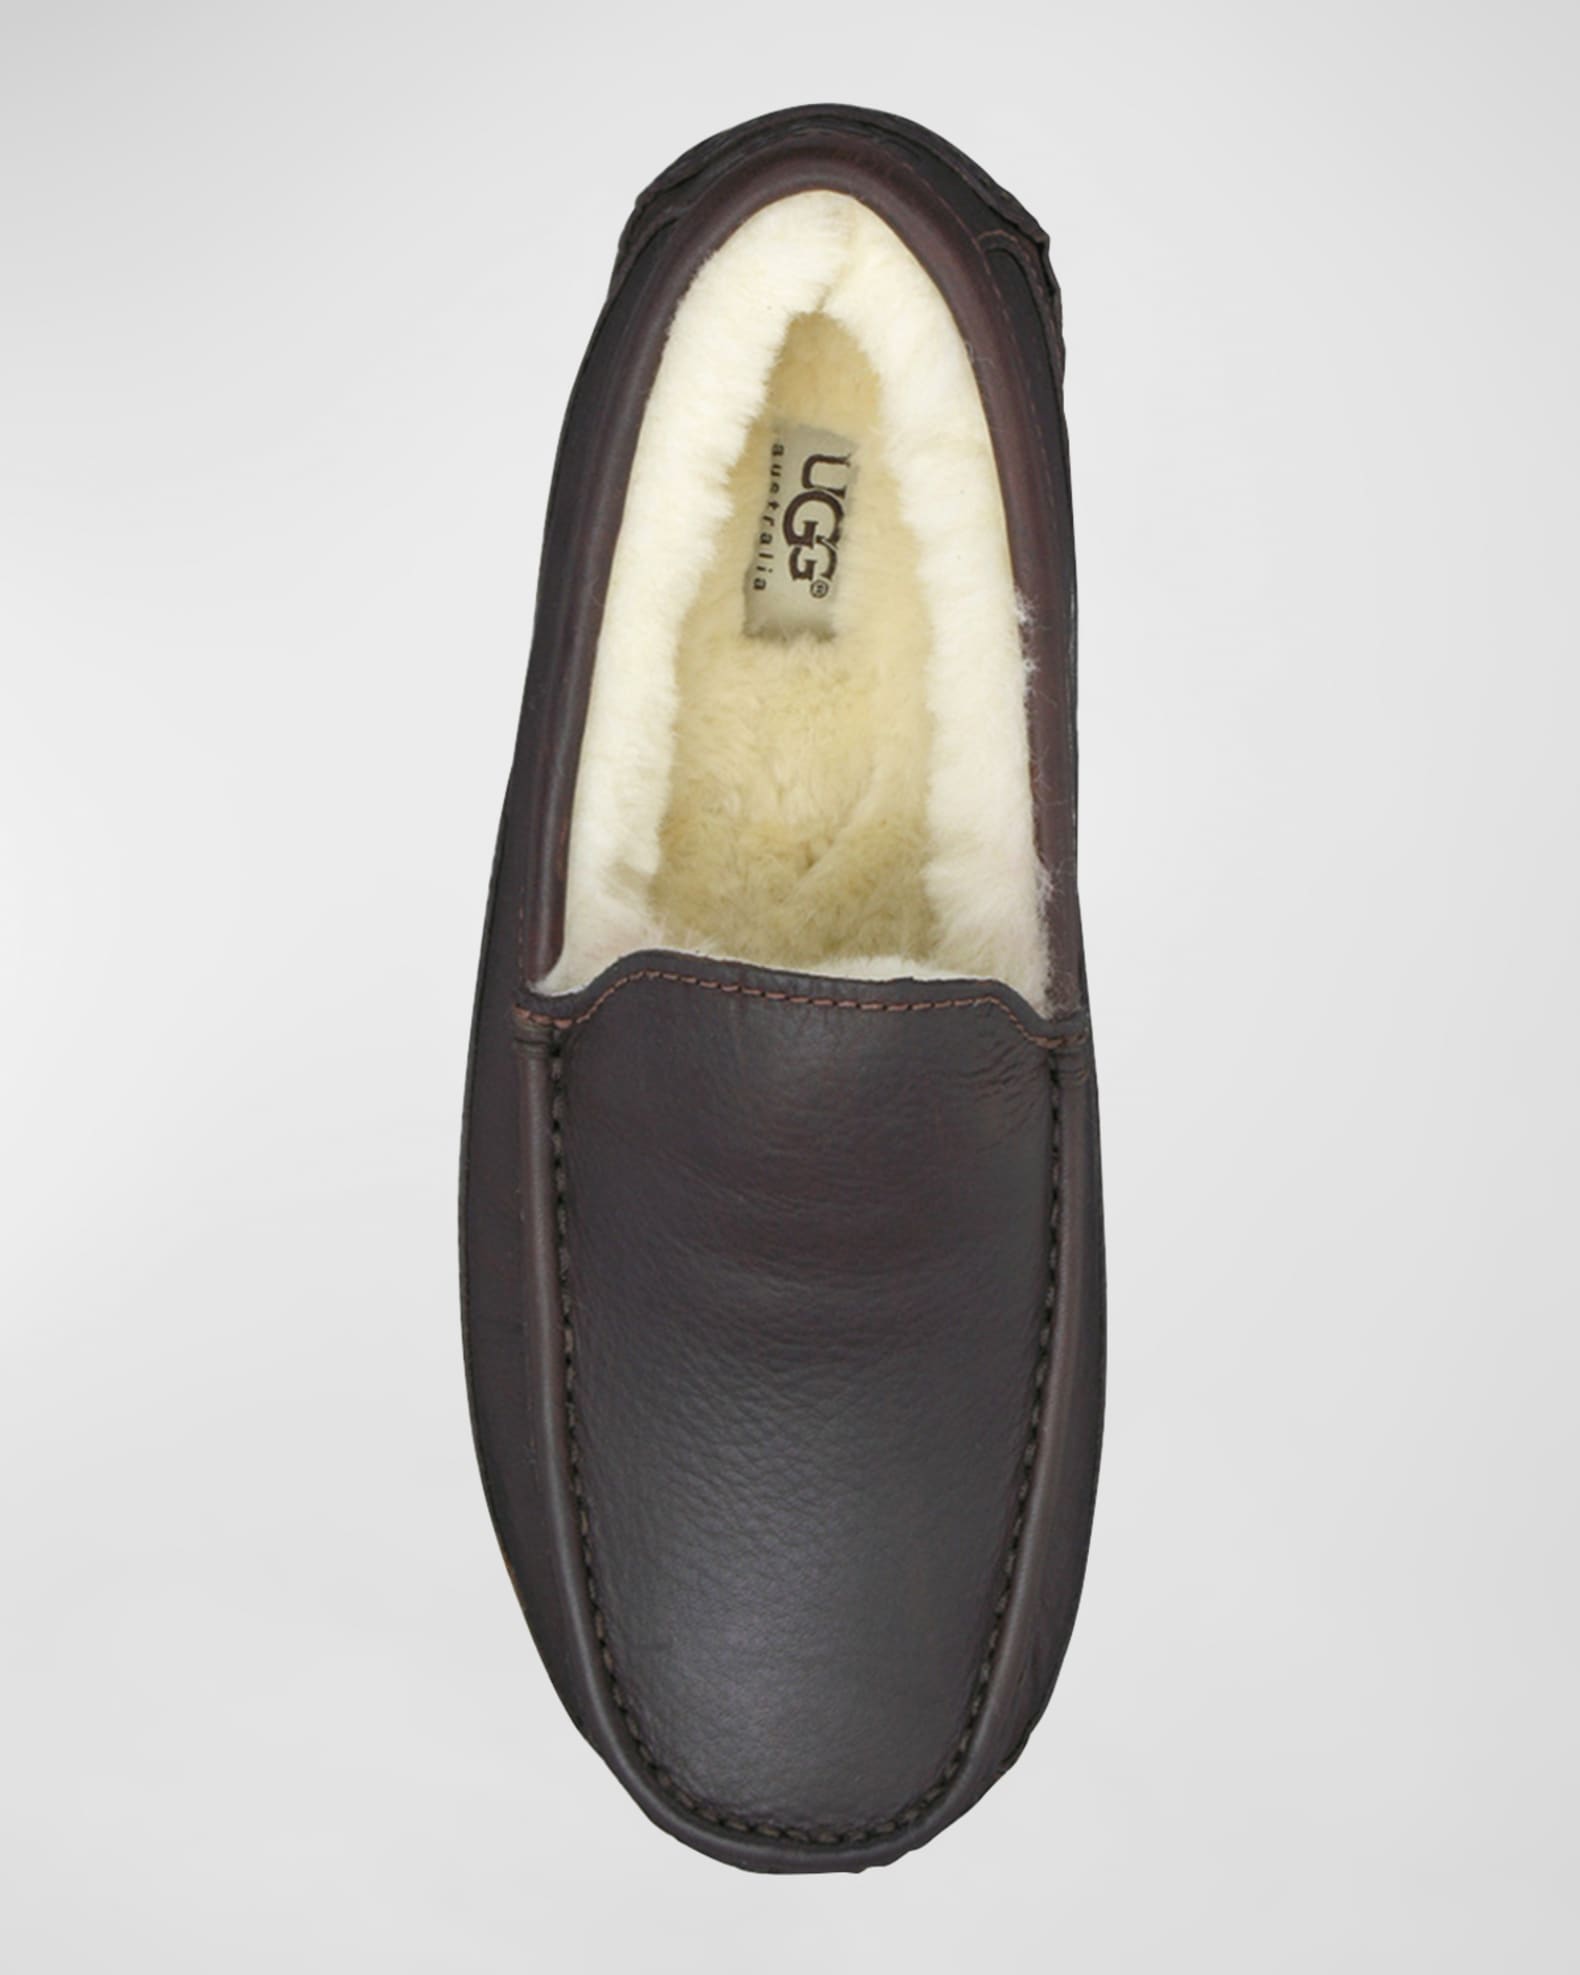 UGG Men's Ascot Water-Resistant Leather Slippers | Neiman Marcus